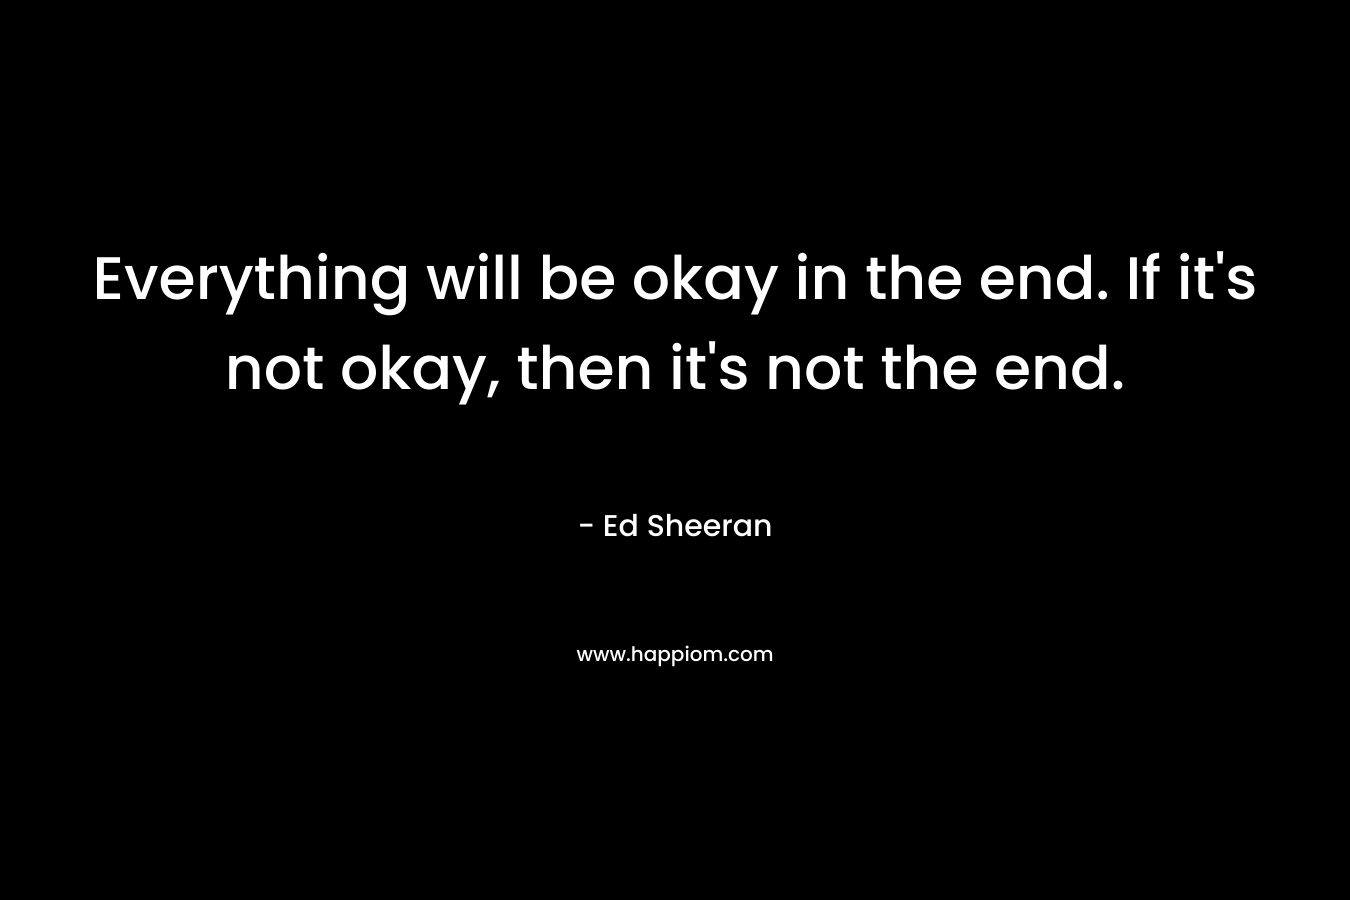 Everything will be okay in the end. If it’s not okay, then it’s not the end. – Ed Sheeran